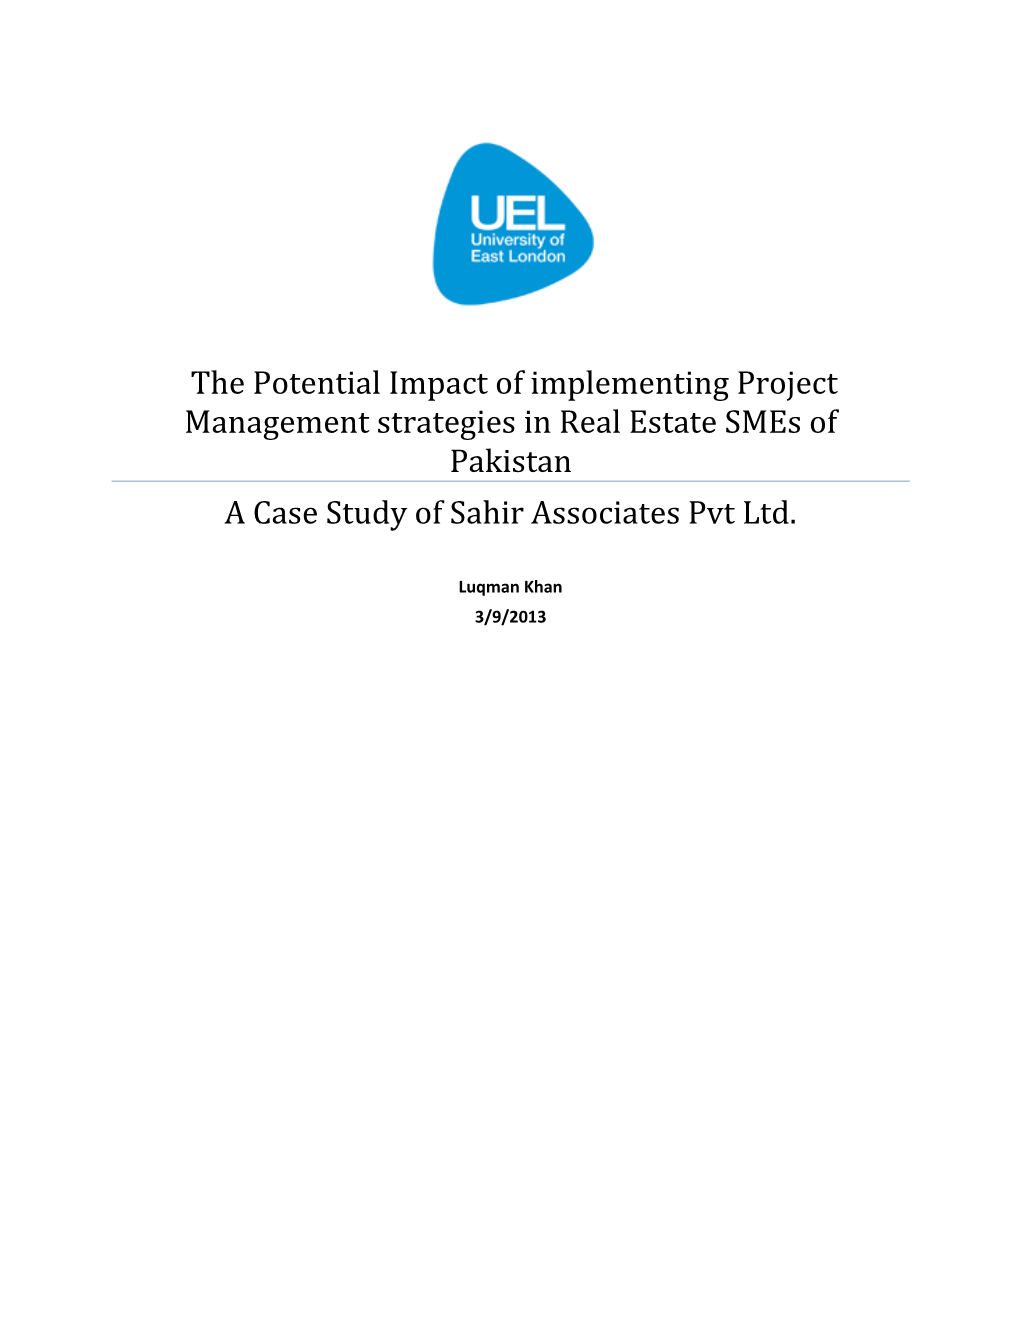 The Potential Impact of Implementing Project Management Strategies in Real Estate Smes of Pakistan a Case Study of Sahir Associates Pvt Ltd